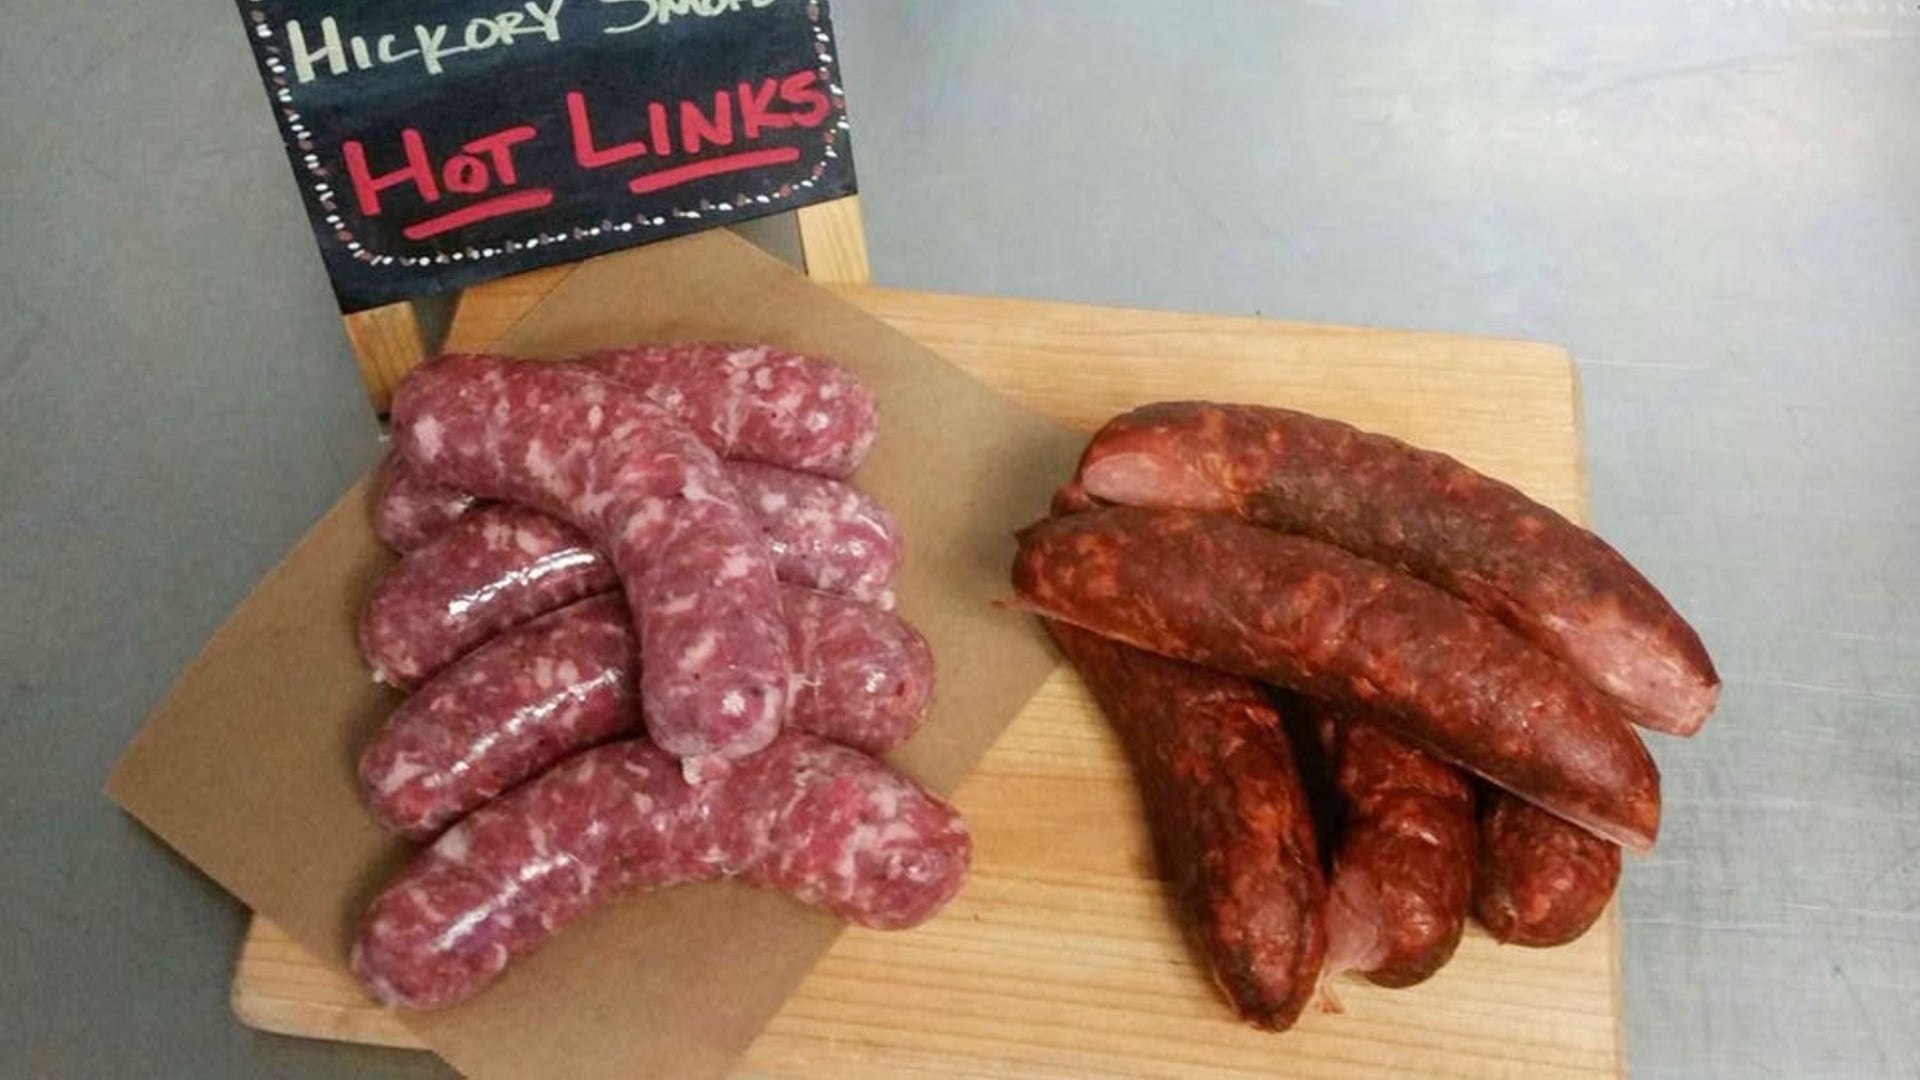 A picture showing several fresh and smoked sausages side by side on a cutting board to show the difference between the two types of sausages.